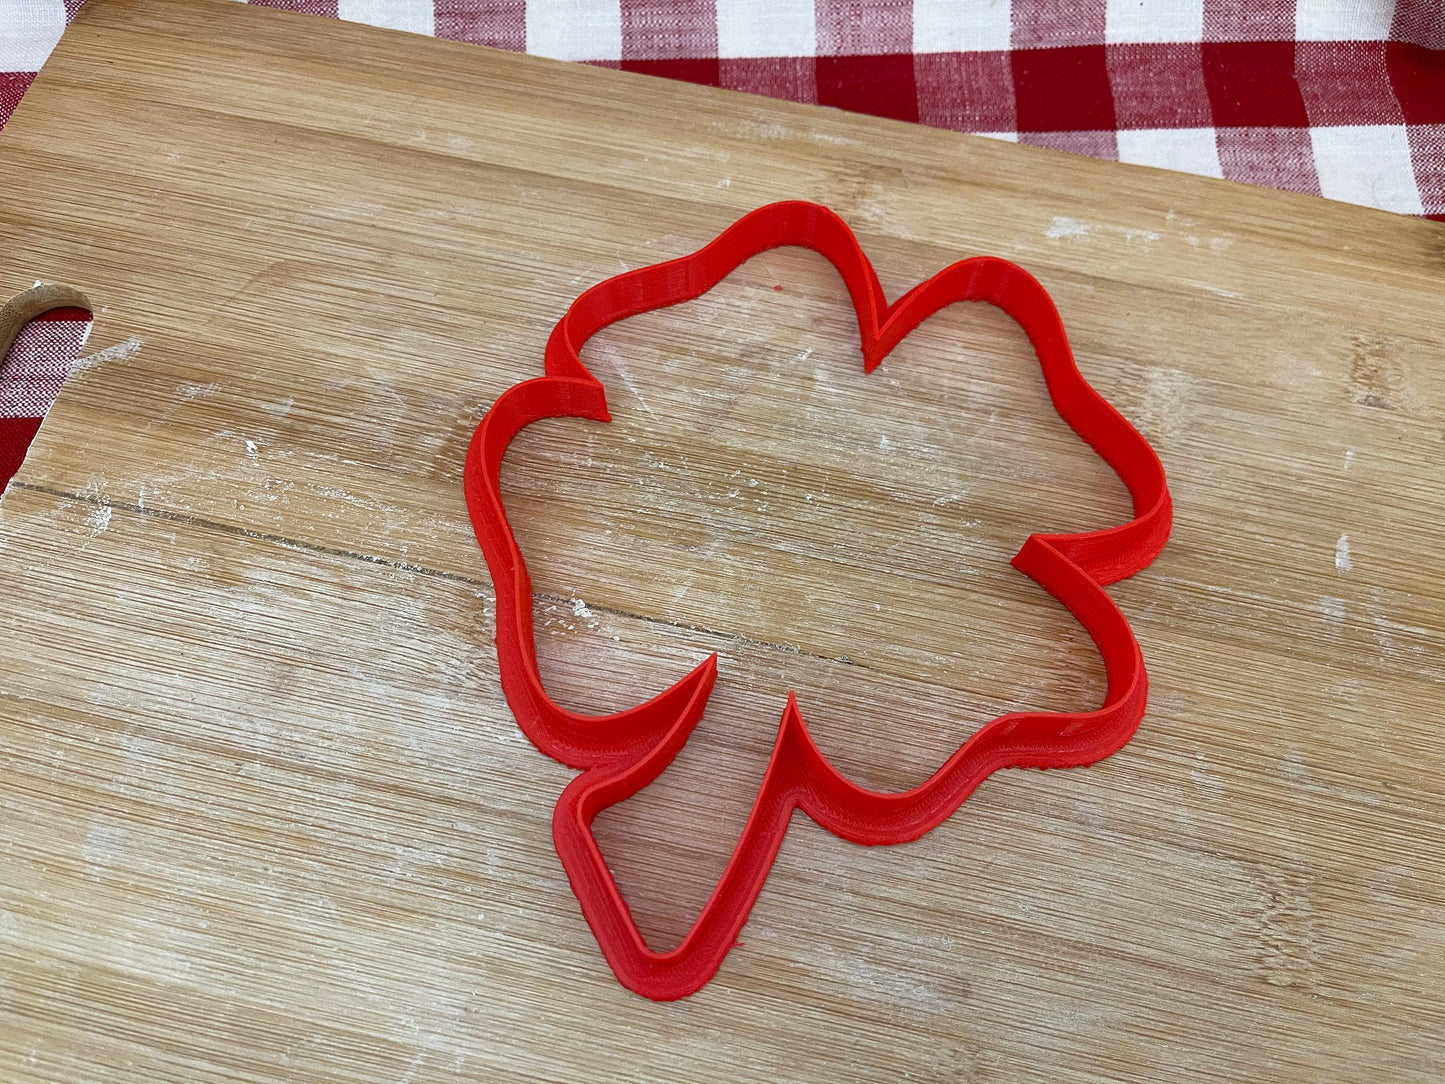 Shamrock / Clover Design, St. Patrick's Day, Clay Cutter - Plastic 3D printed, Pottery Tool, multiple sizes